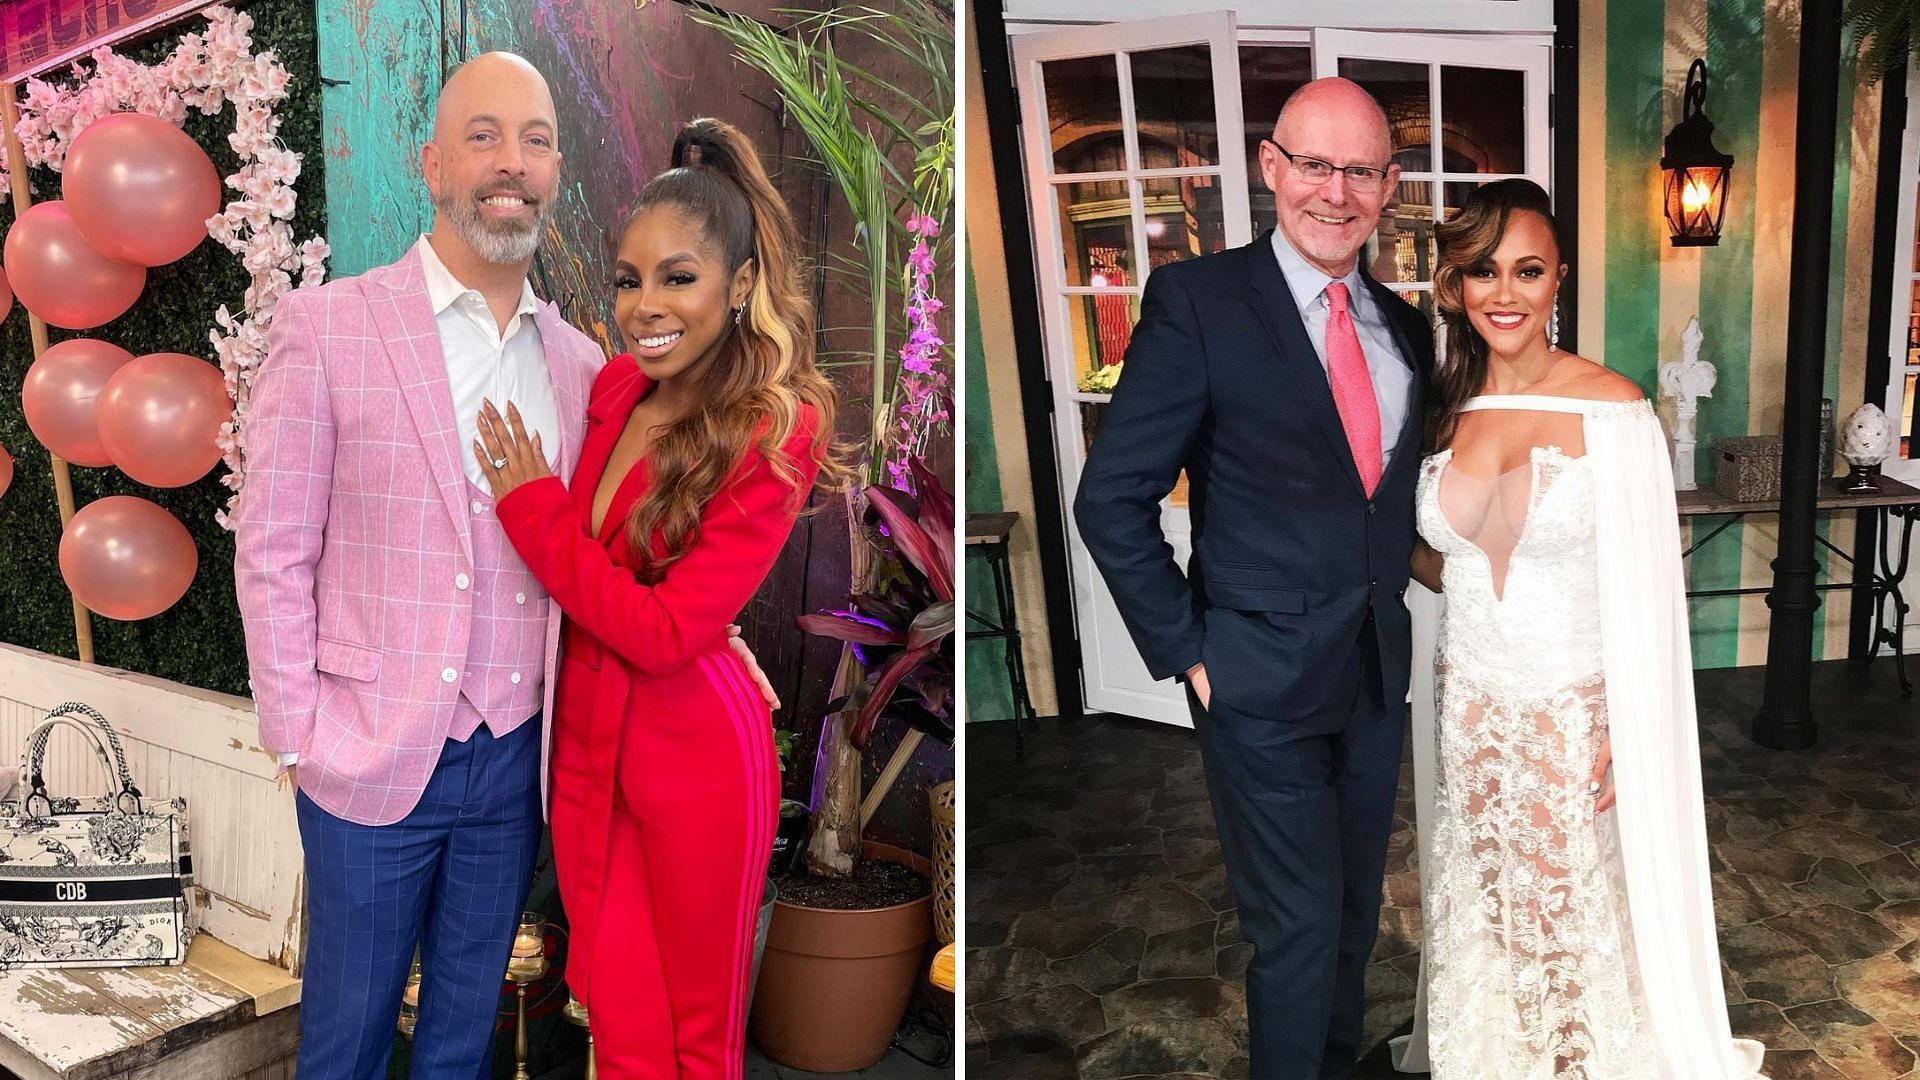 Candiance defends her husband and calls out Michael Darby on RHOP